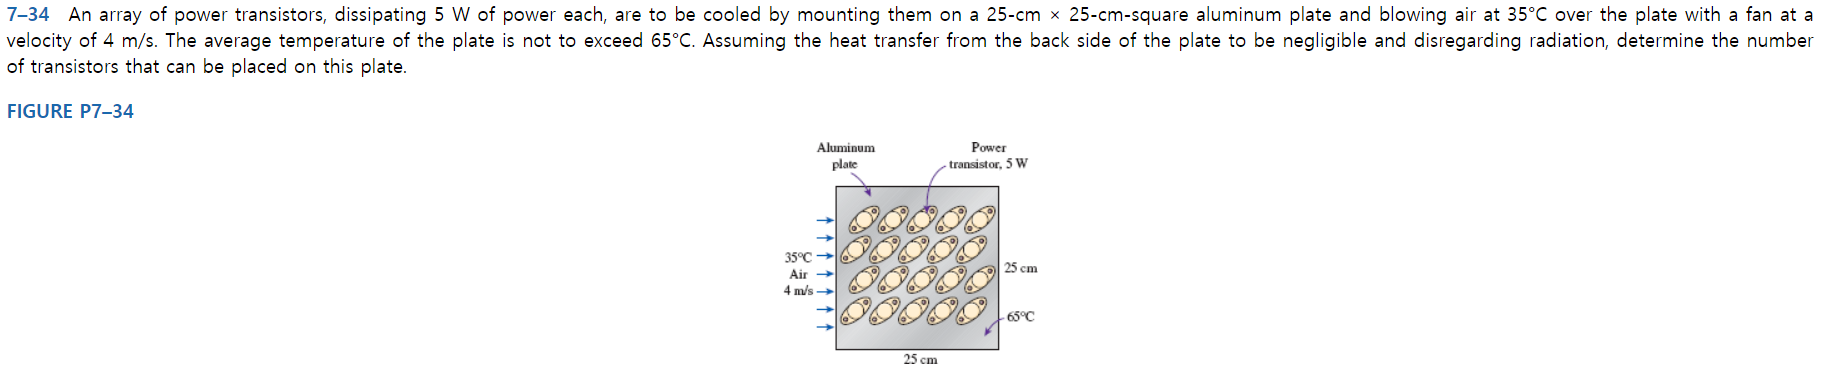 7-34 An array of power transistors, dissipating 5 W of power each, are to be cooled by mounting them on a 25-cm x 25-cm-square aluminum plate and blowing air at 35°C over the plate with a fan at a
velocity of 4 m/s. The average temperature of the plate is not to exceed 65°C. Assuming the heat transfer from the back side of the plate to be negligible and disregarding radiation, determine the number
of transistors that can be placed on this plate.
FIGURE P7-34
Aluminum
Power
plate
transistor, 5 W
35°C
25 cm
Air →
4 m/s
-65°C
25 cm
